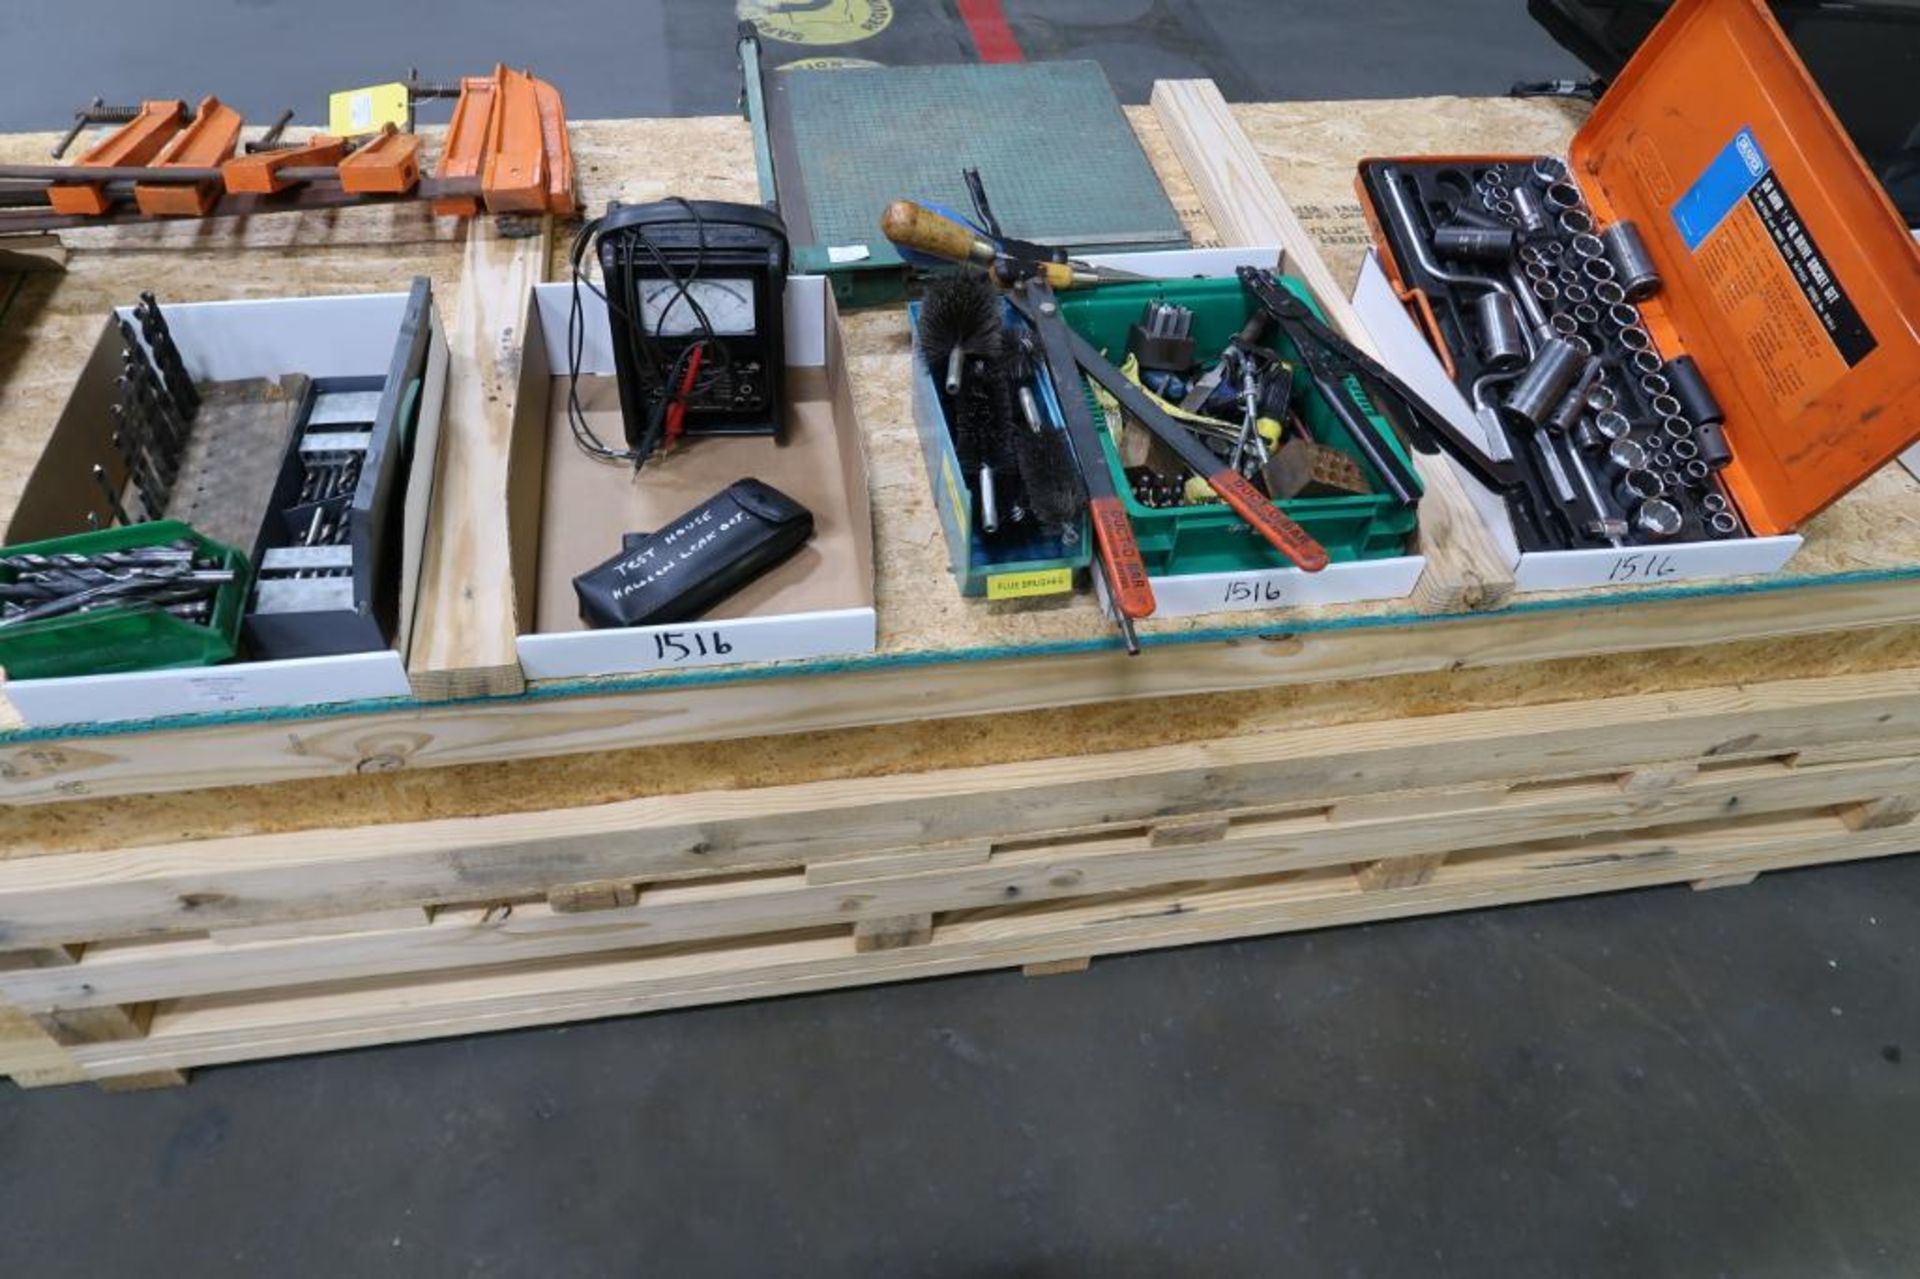 Box Lot of Drills, Electric Meter, Gas Leak Checker, Hand Tools, Number Stamps, Socket Set - Not Com